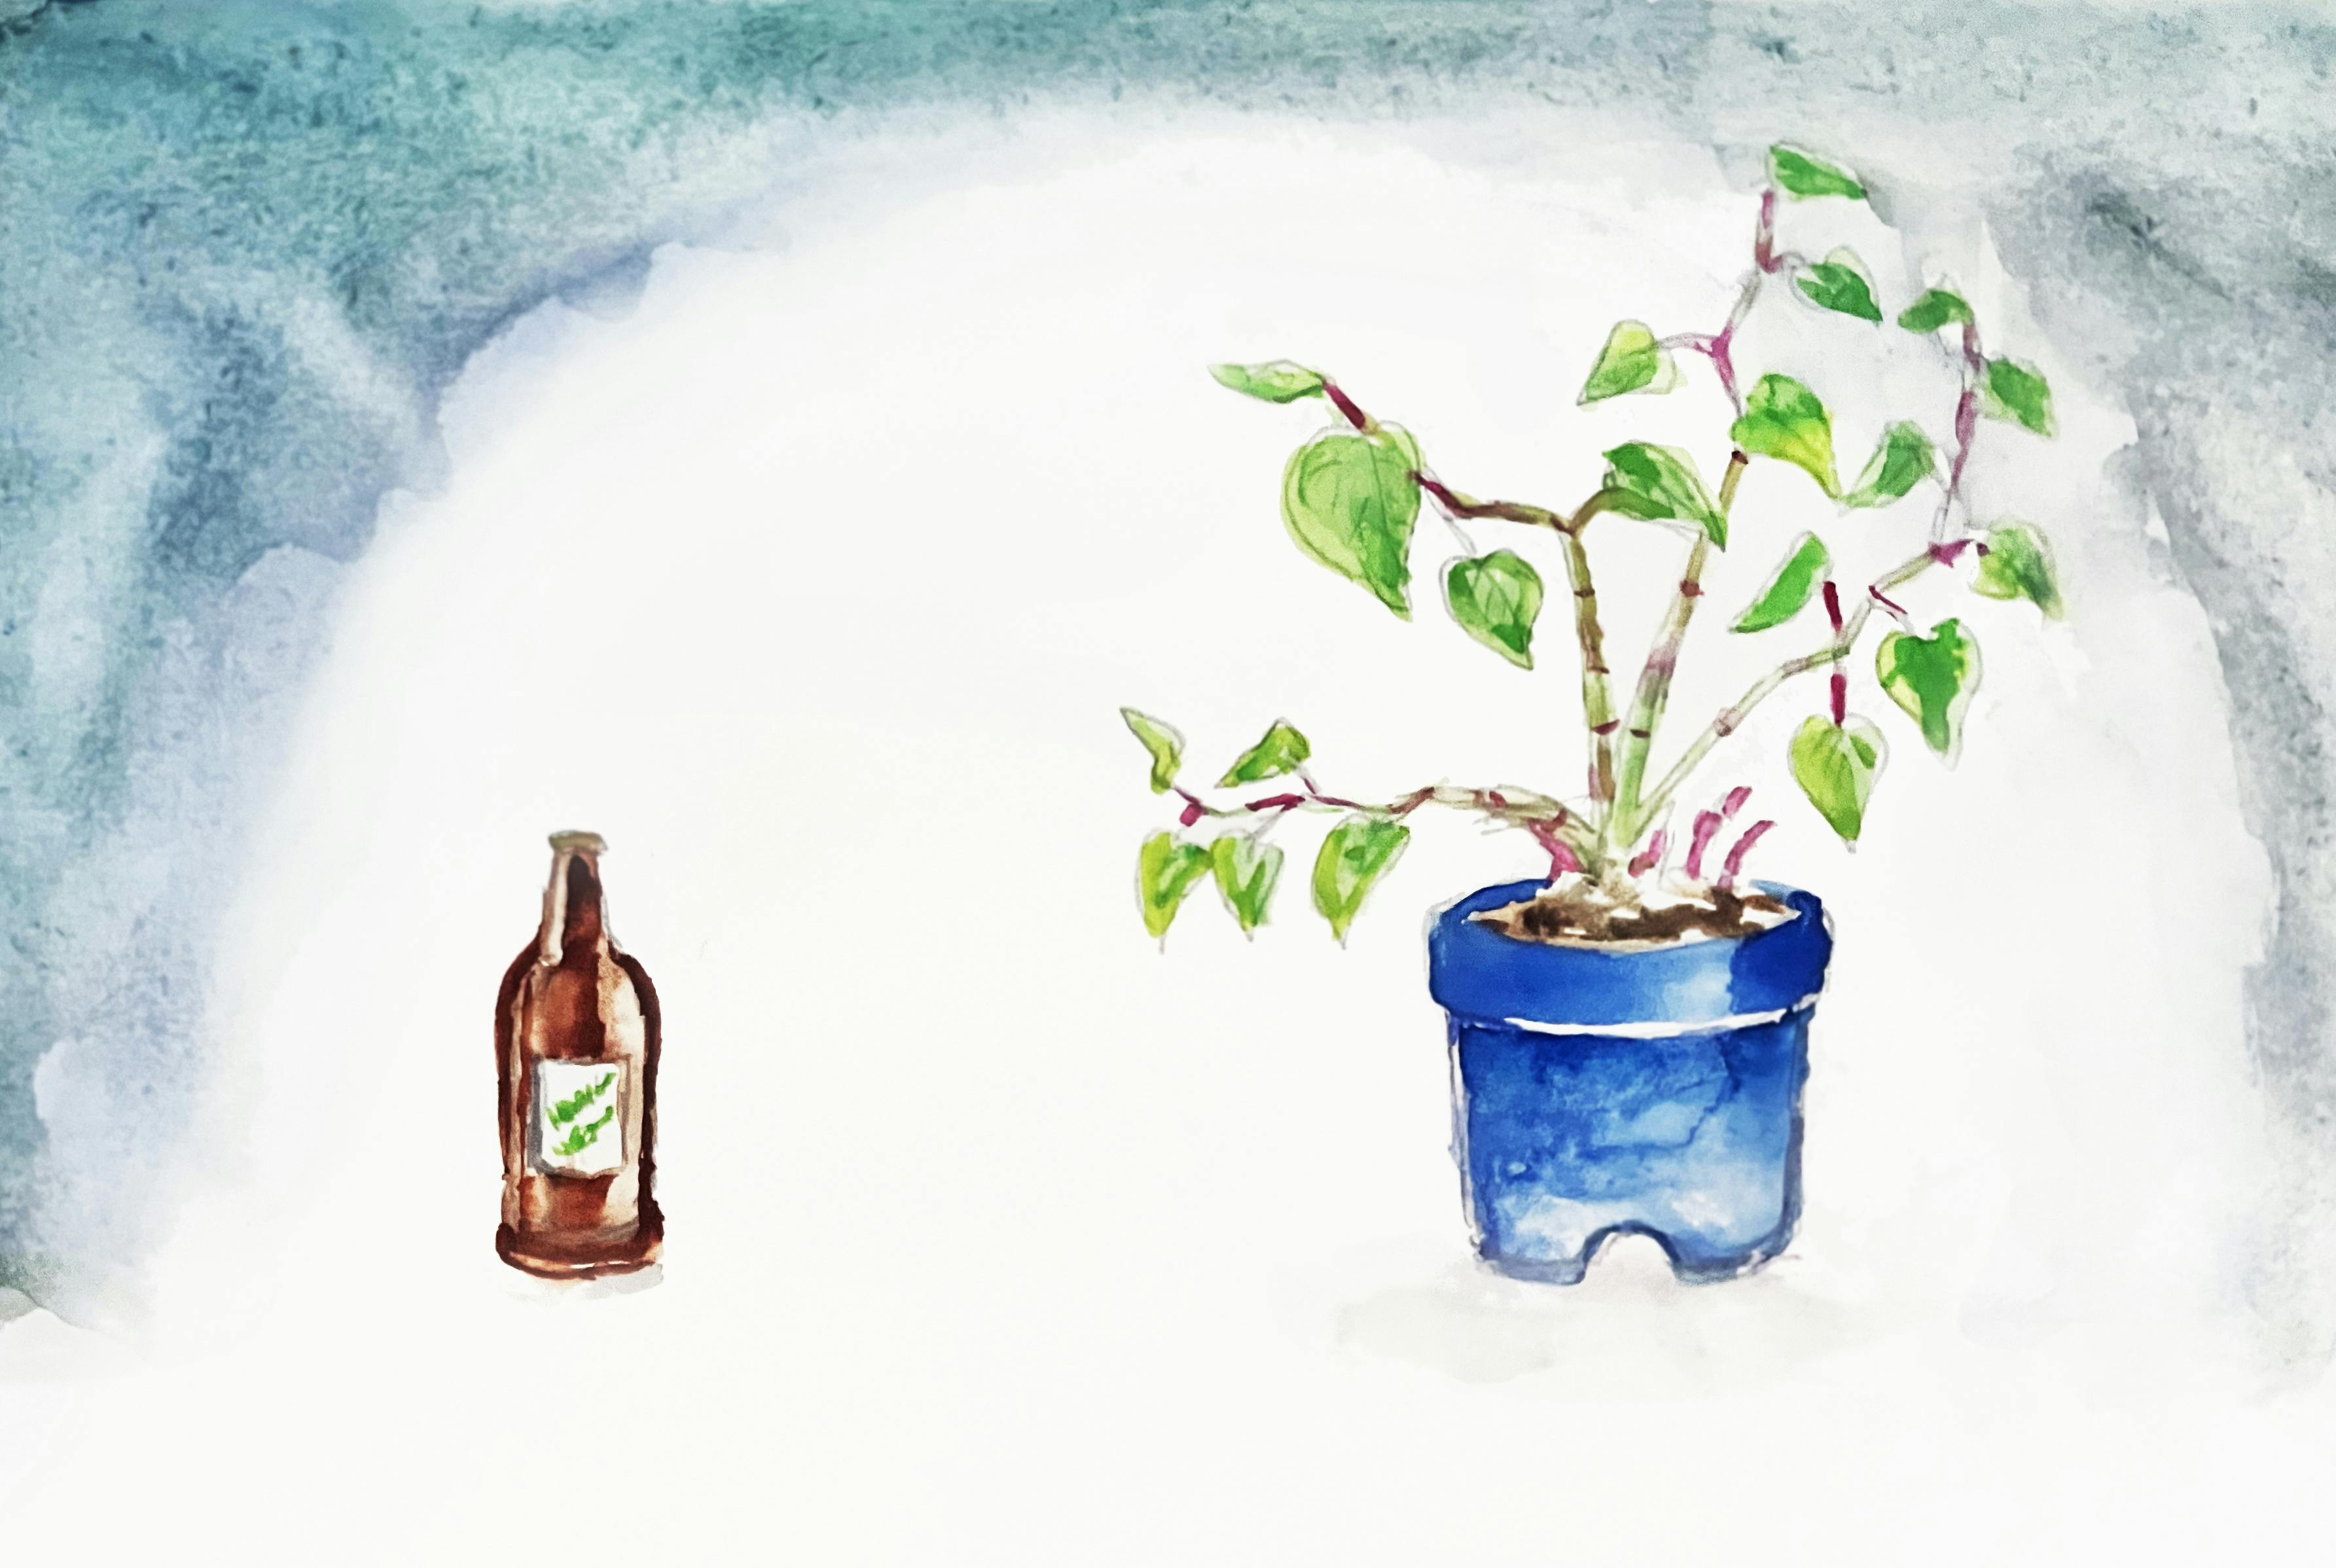 A watercolour painting of a bottle next to a plant